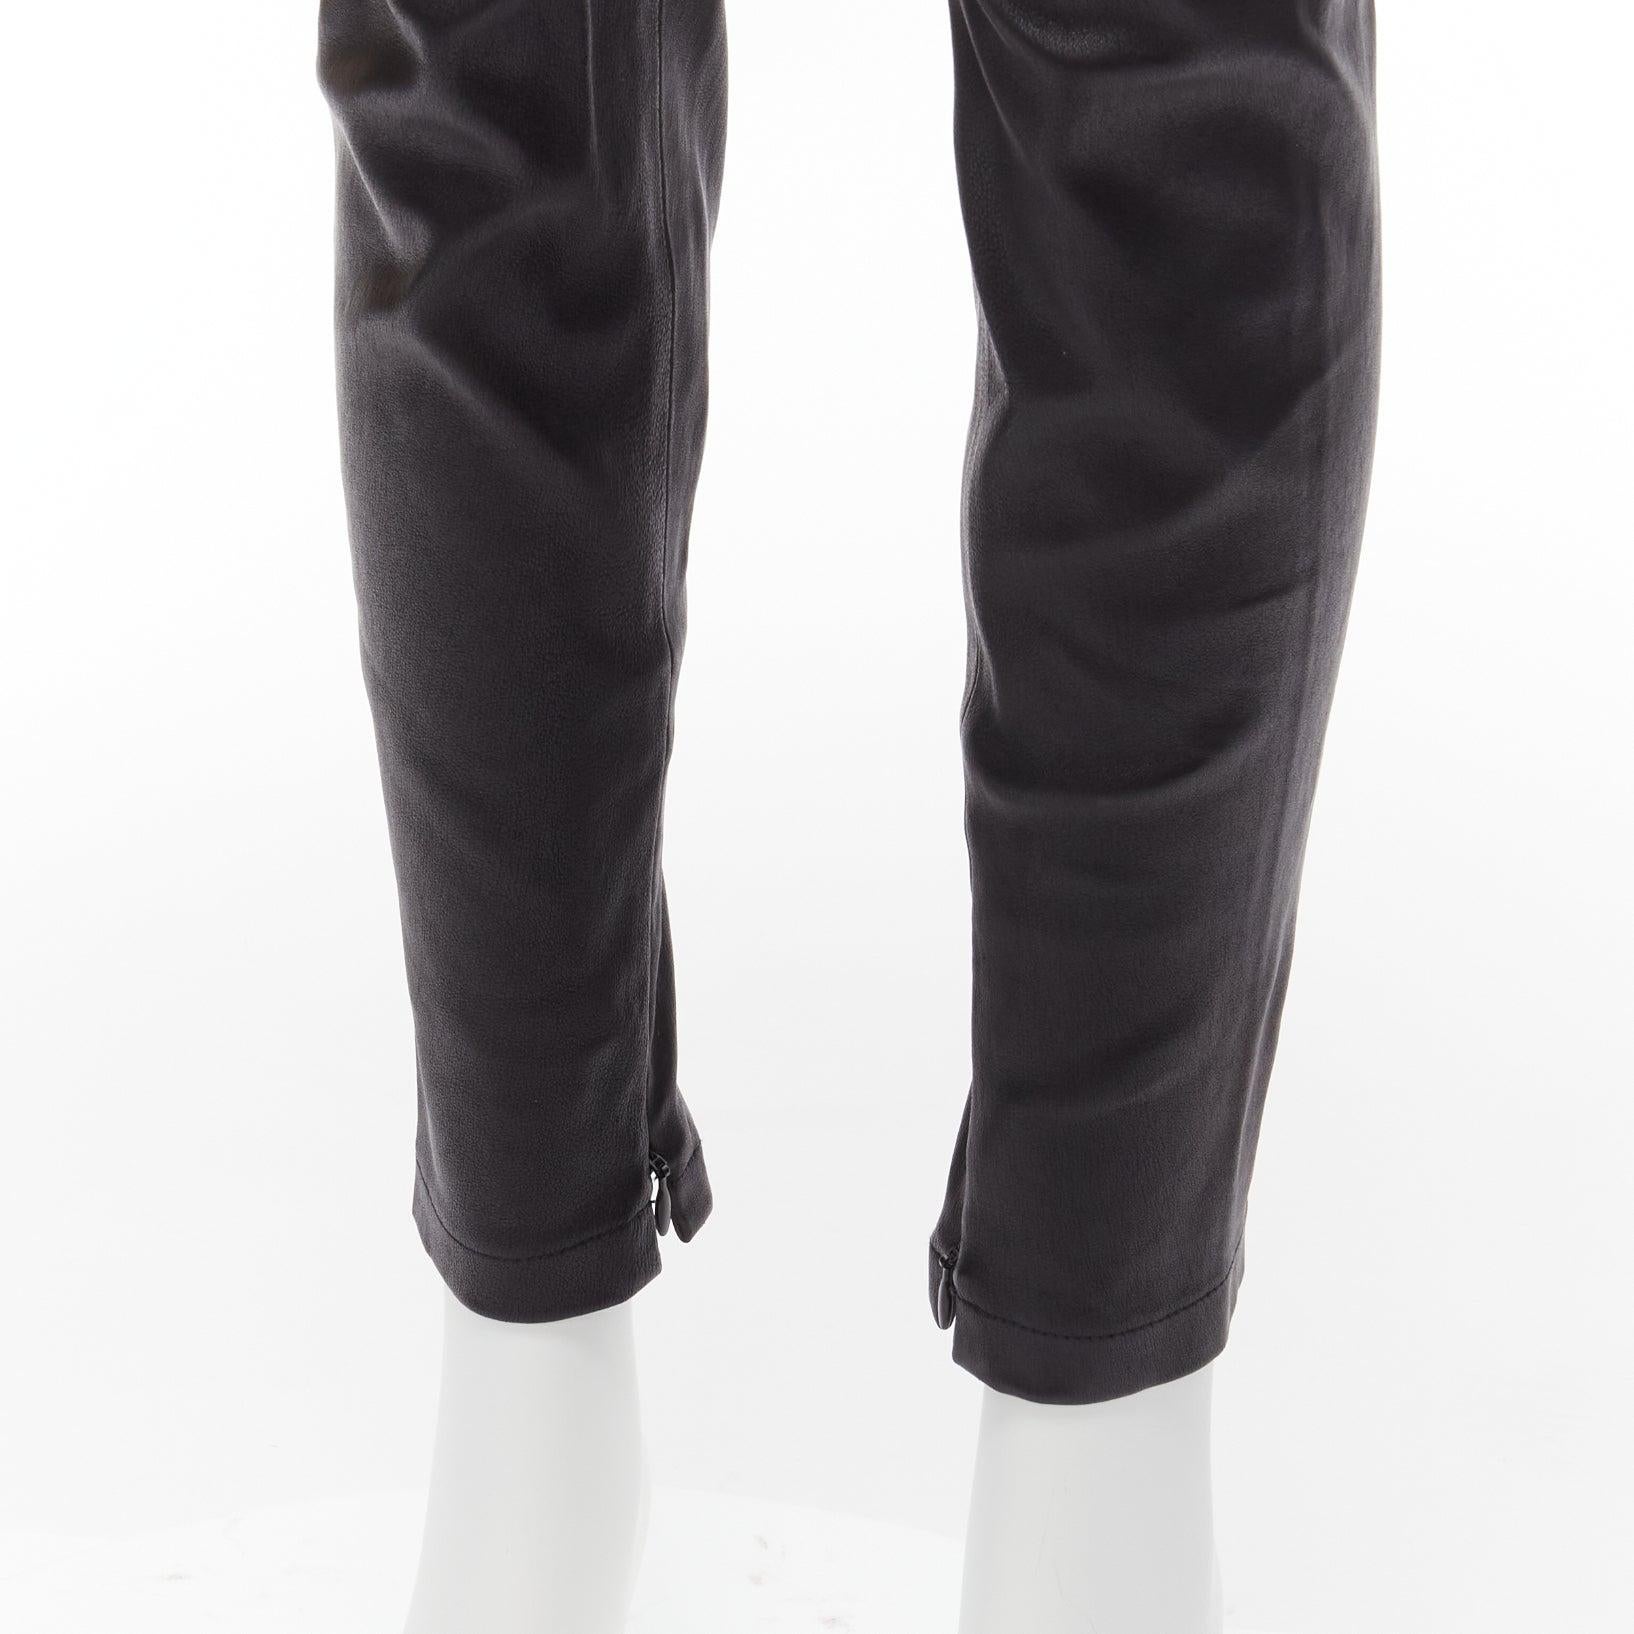 VINCE black genuine leather panelled back darts fitted moto leggings XS
Reference: LNKO/A02220
Brand: Vince
Material: Leather
Color: Black
Pattern: Solid
Closure: Elasticated
Lining: Grey Fabric
Made in: China

CONDITION:
Condition: Good, this item